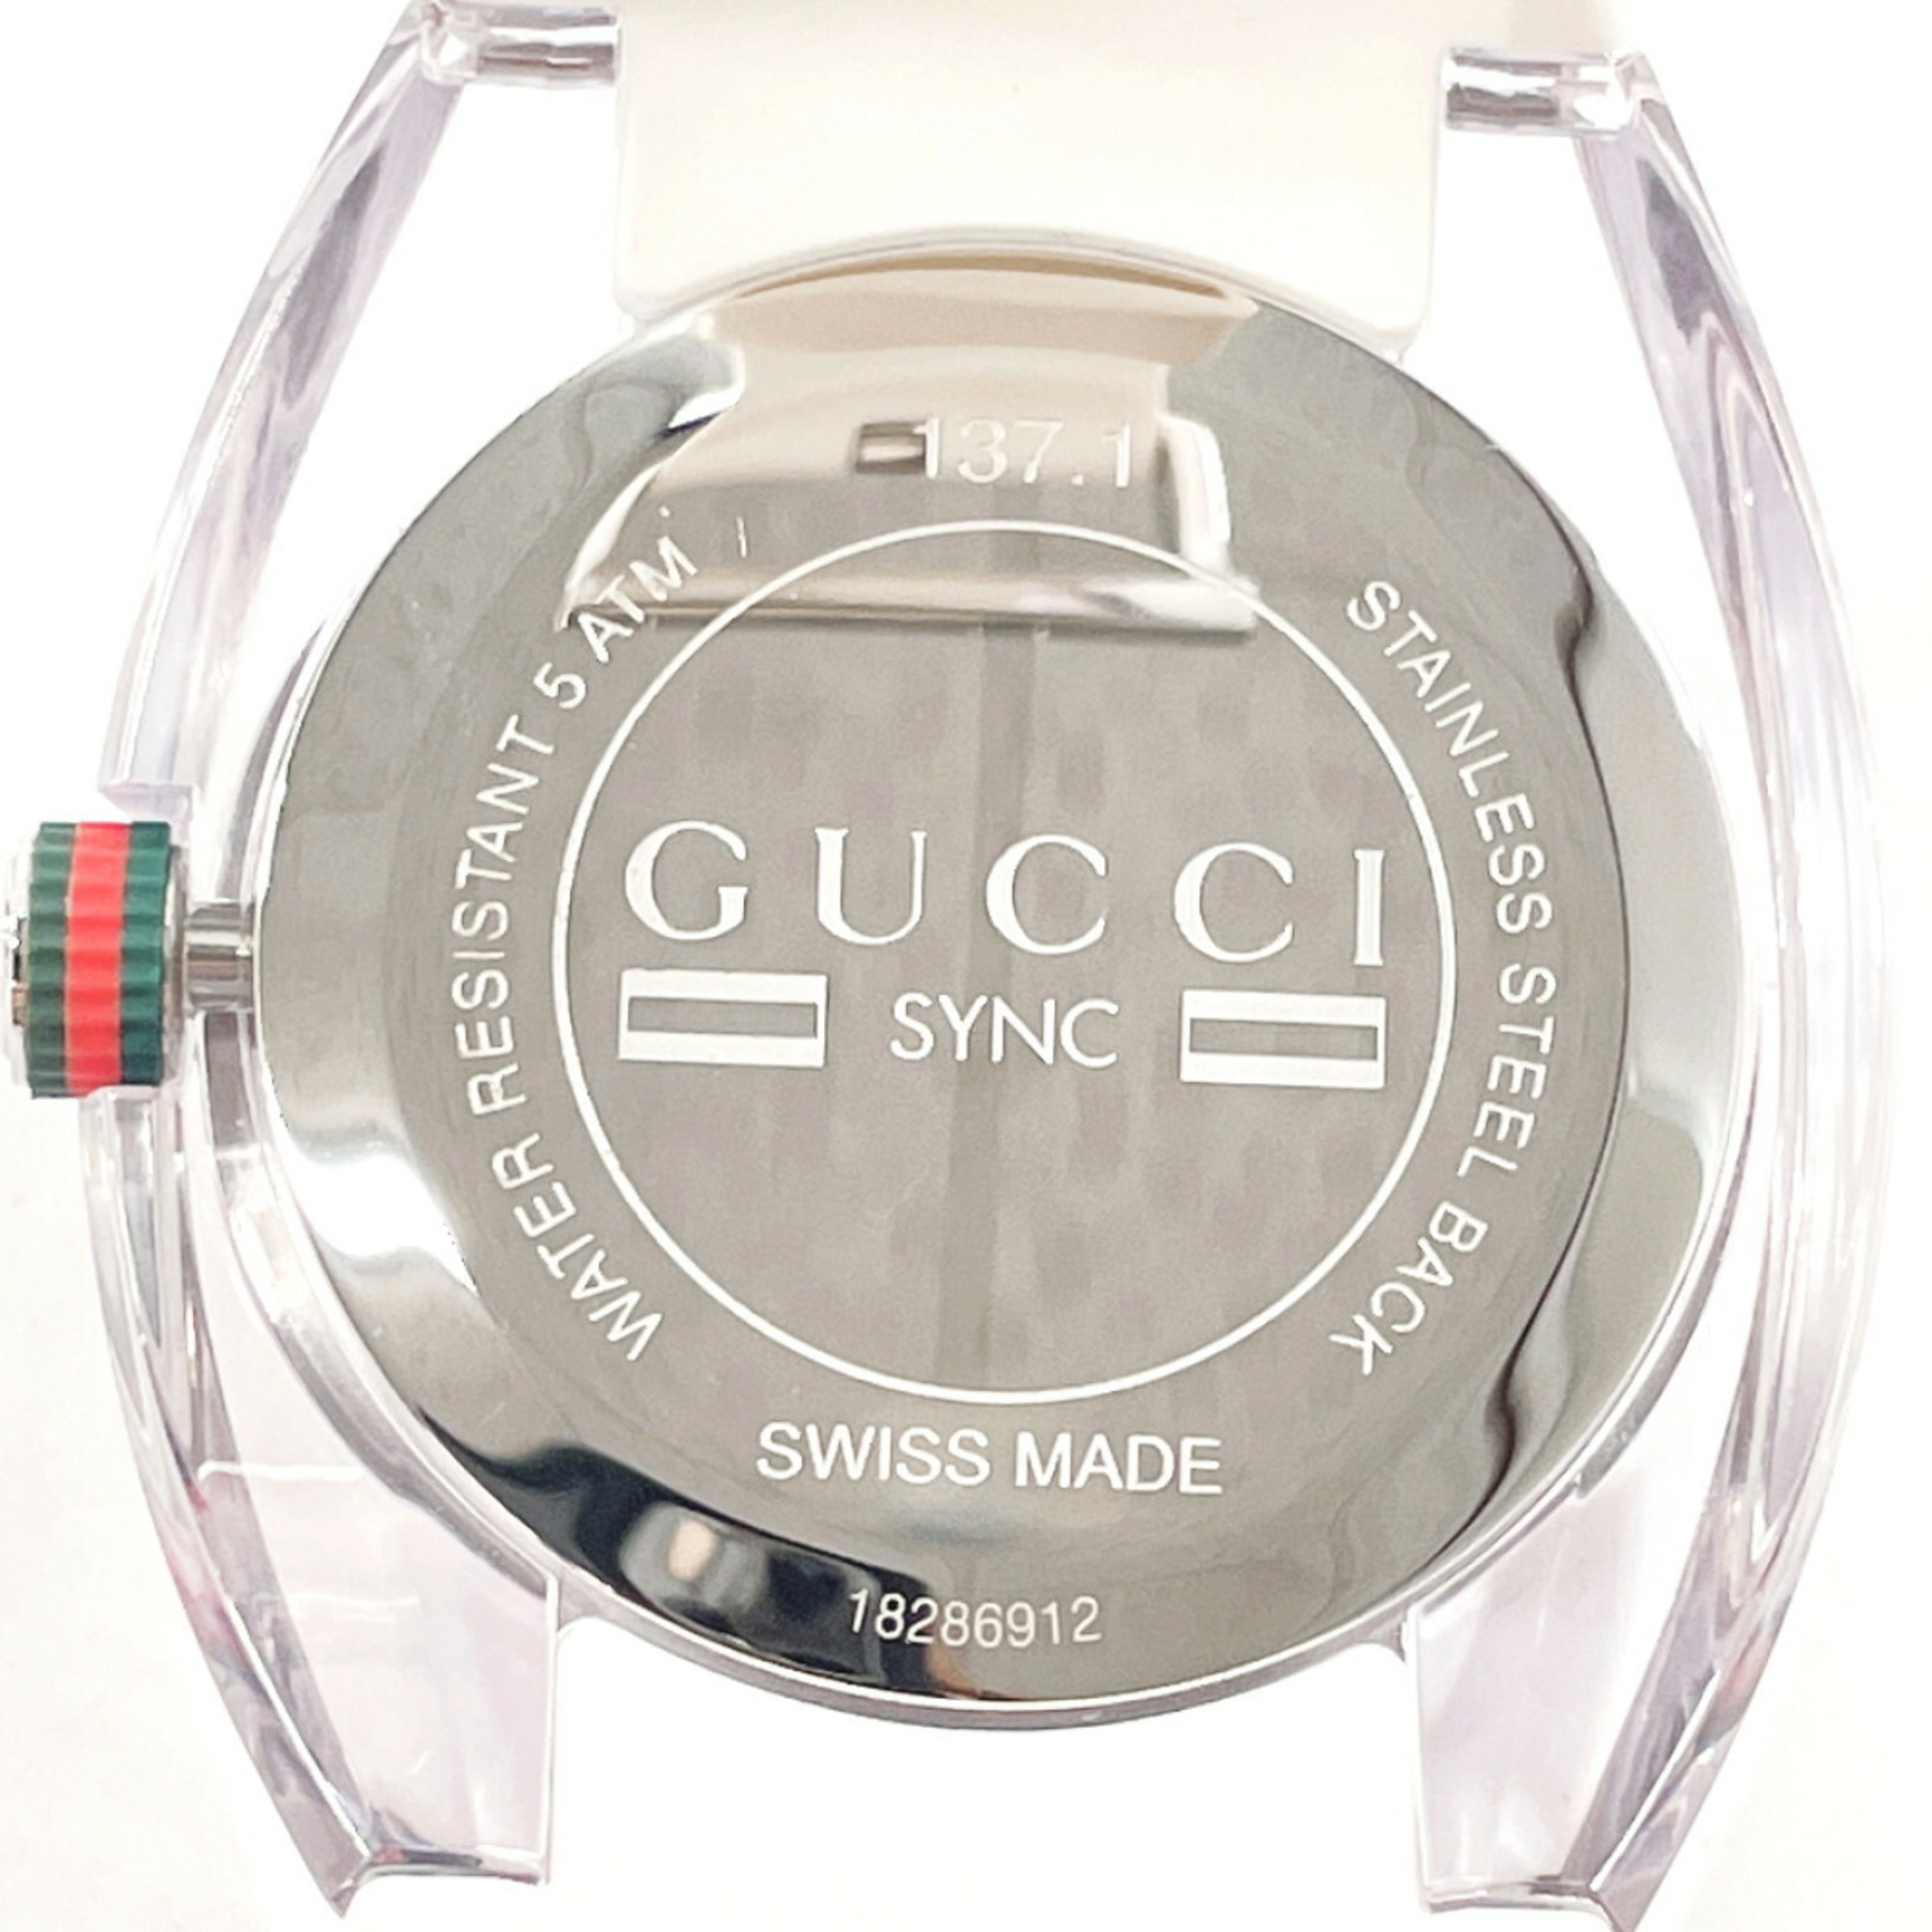 GUCCI Gucci Sink 137.1 Watch Stainless Steel Rubber Silver Quartz Dial Men's